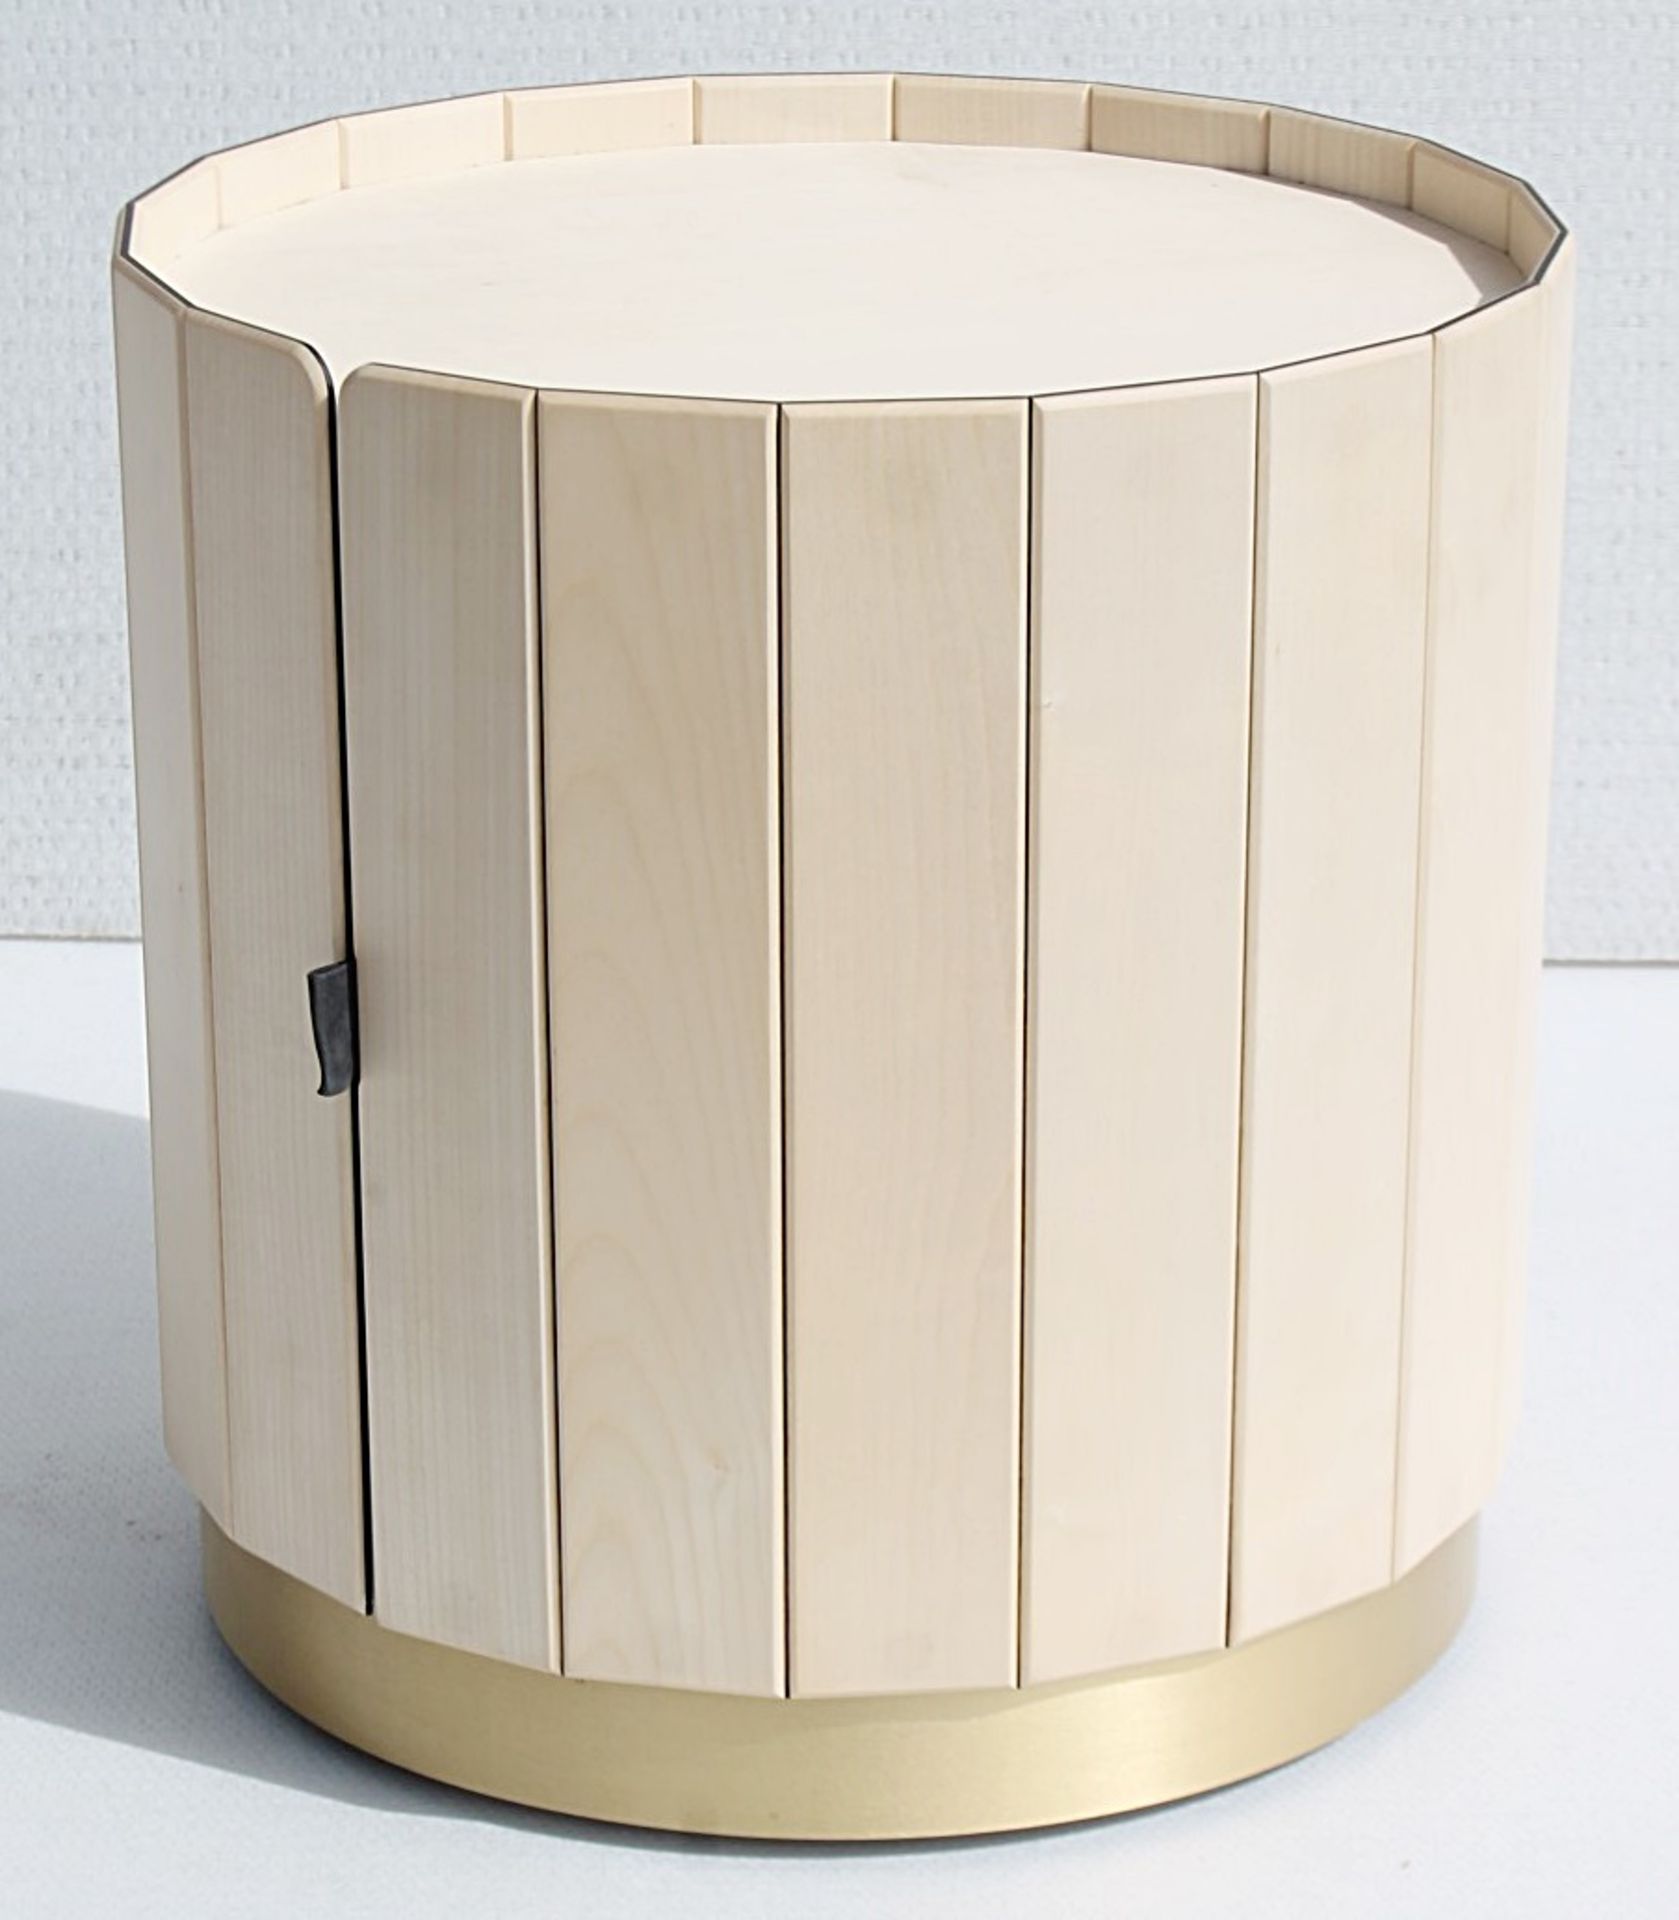 1 x BAXTER 'Ninfea' Italian Designer Solid Maple Bedside Table With Storage - Original Price £2,399 - Image 3 of 7